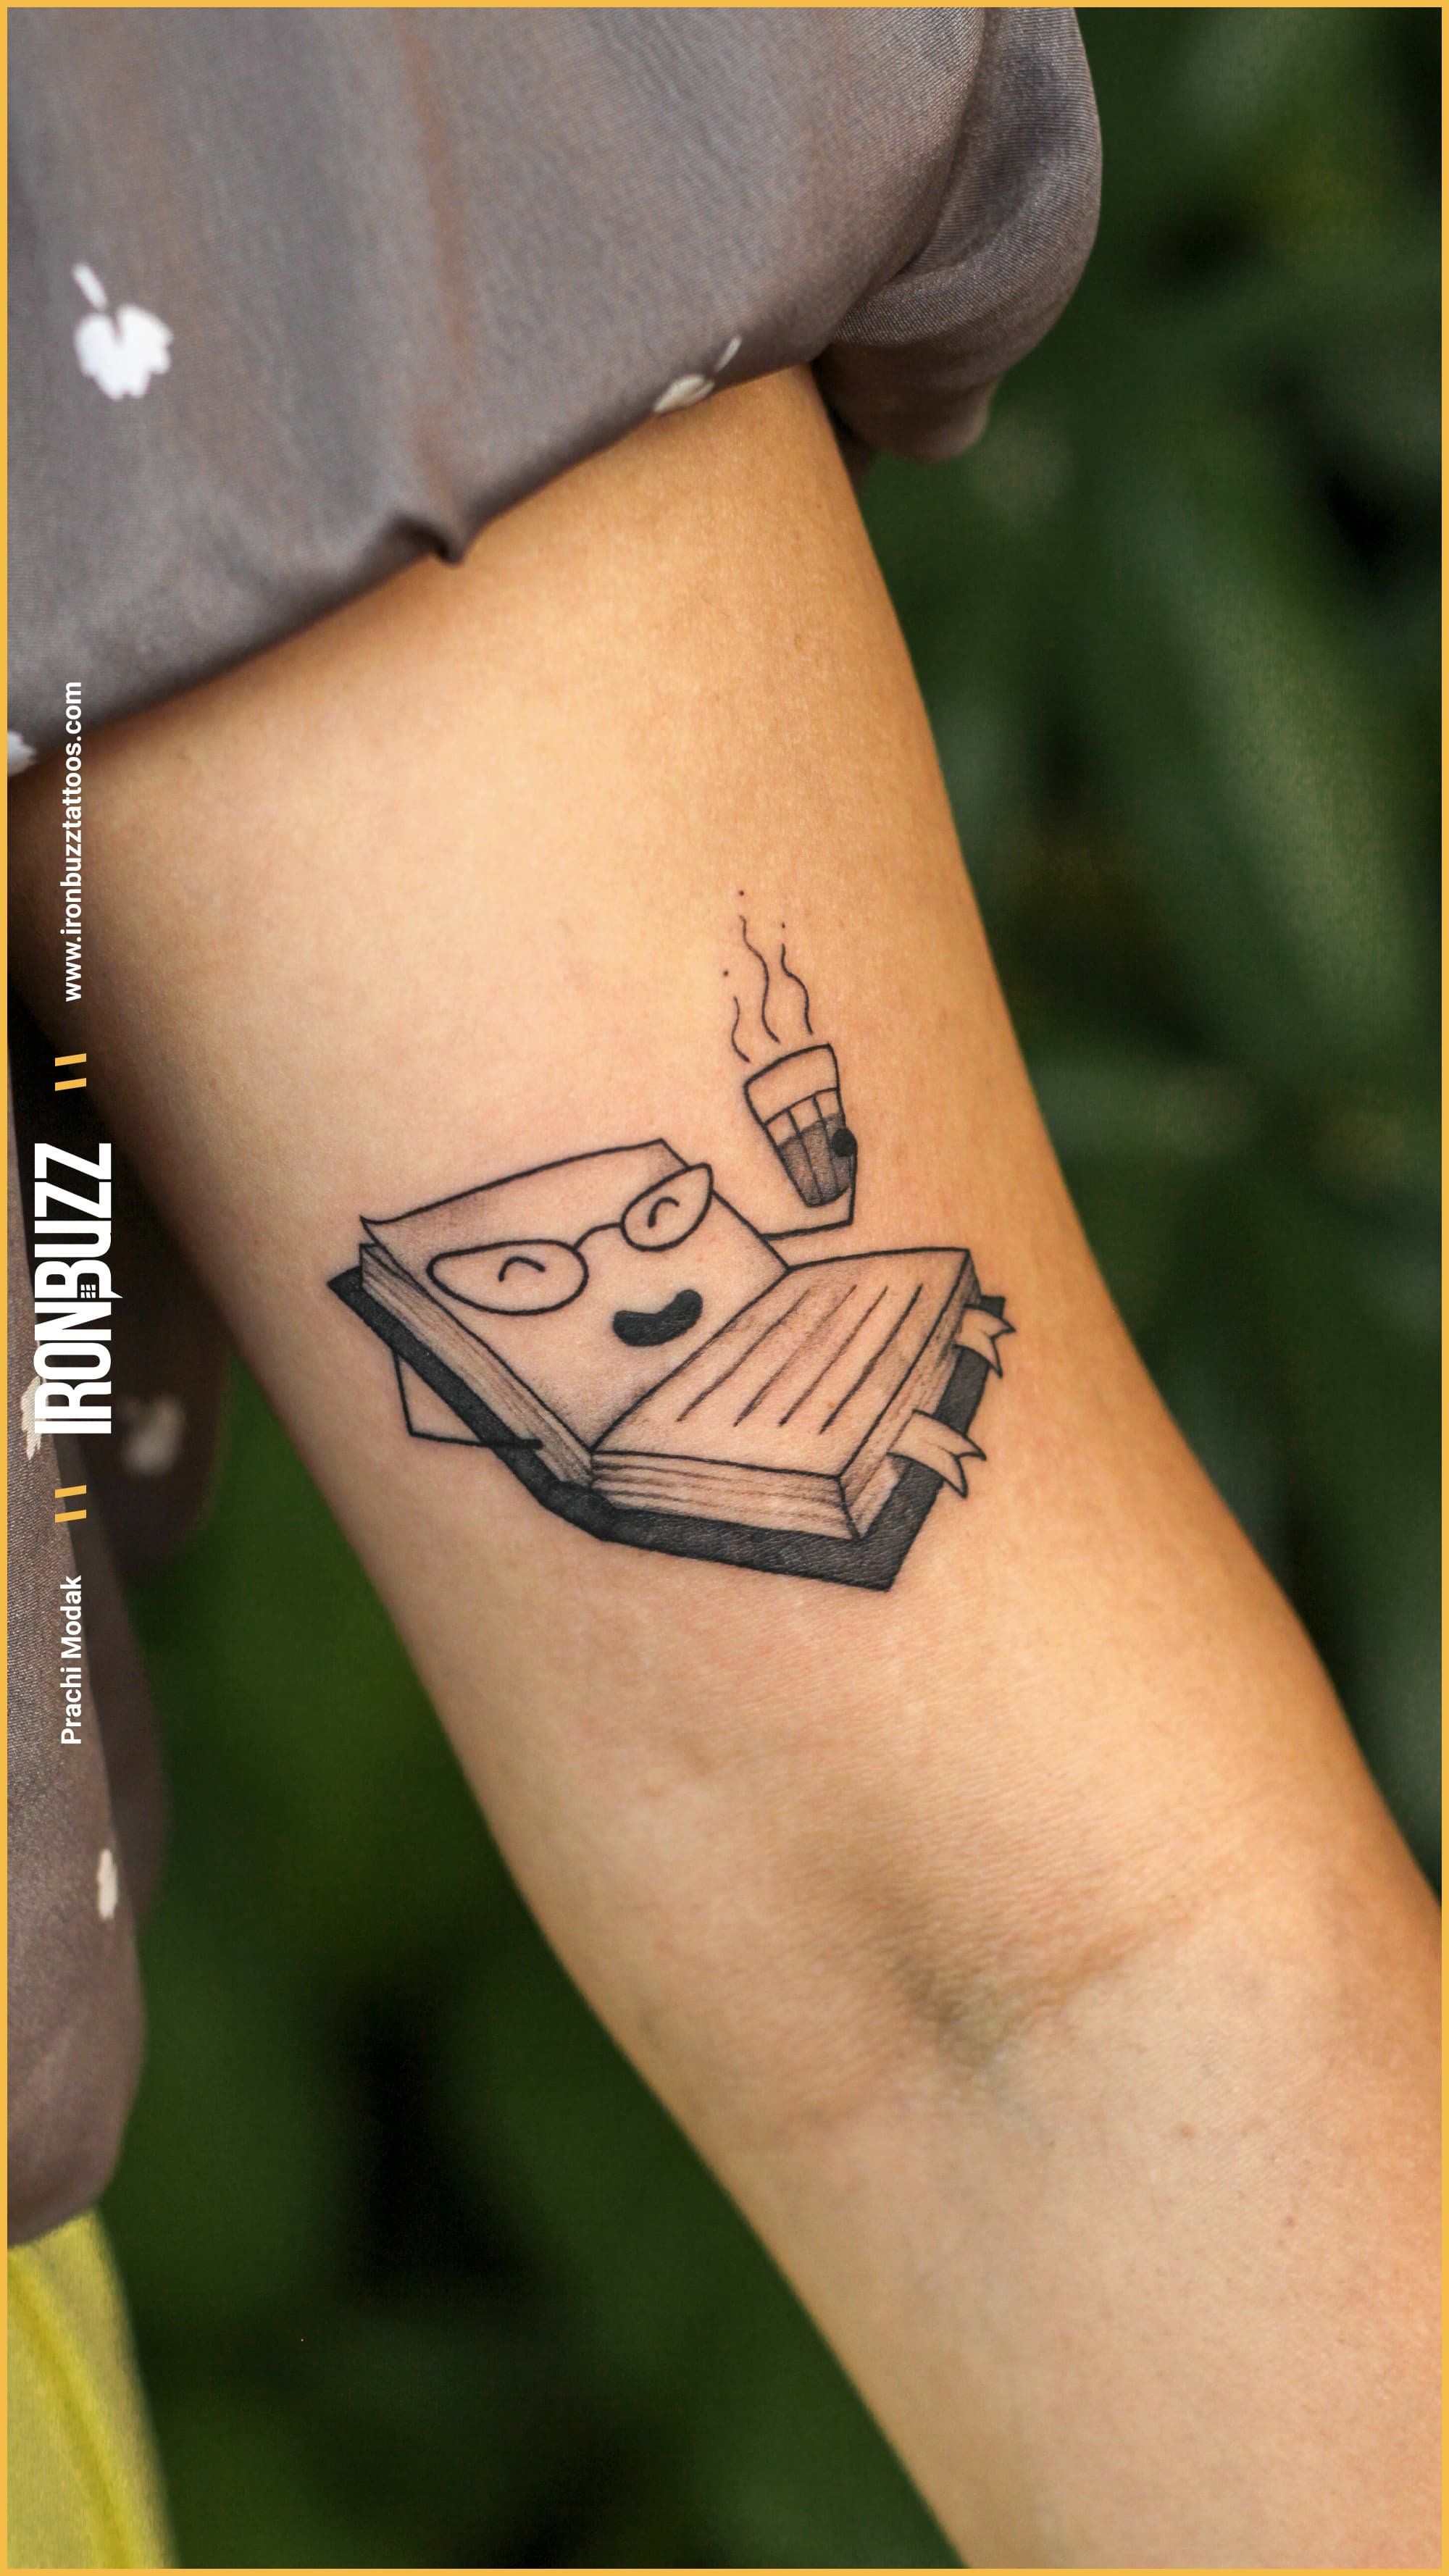 Buy The 1975 First Disobey Then Look at Your Phones a Brief Inquiry Into  Online Relationships Box Tattoo Design by the1975tattoodesigns Online in  India - Etsy